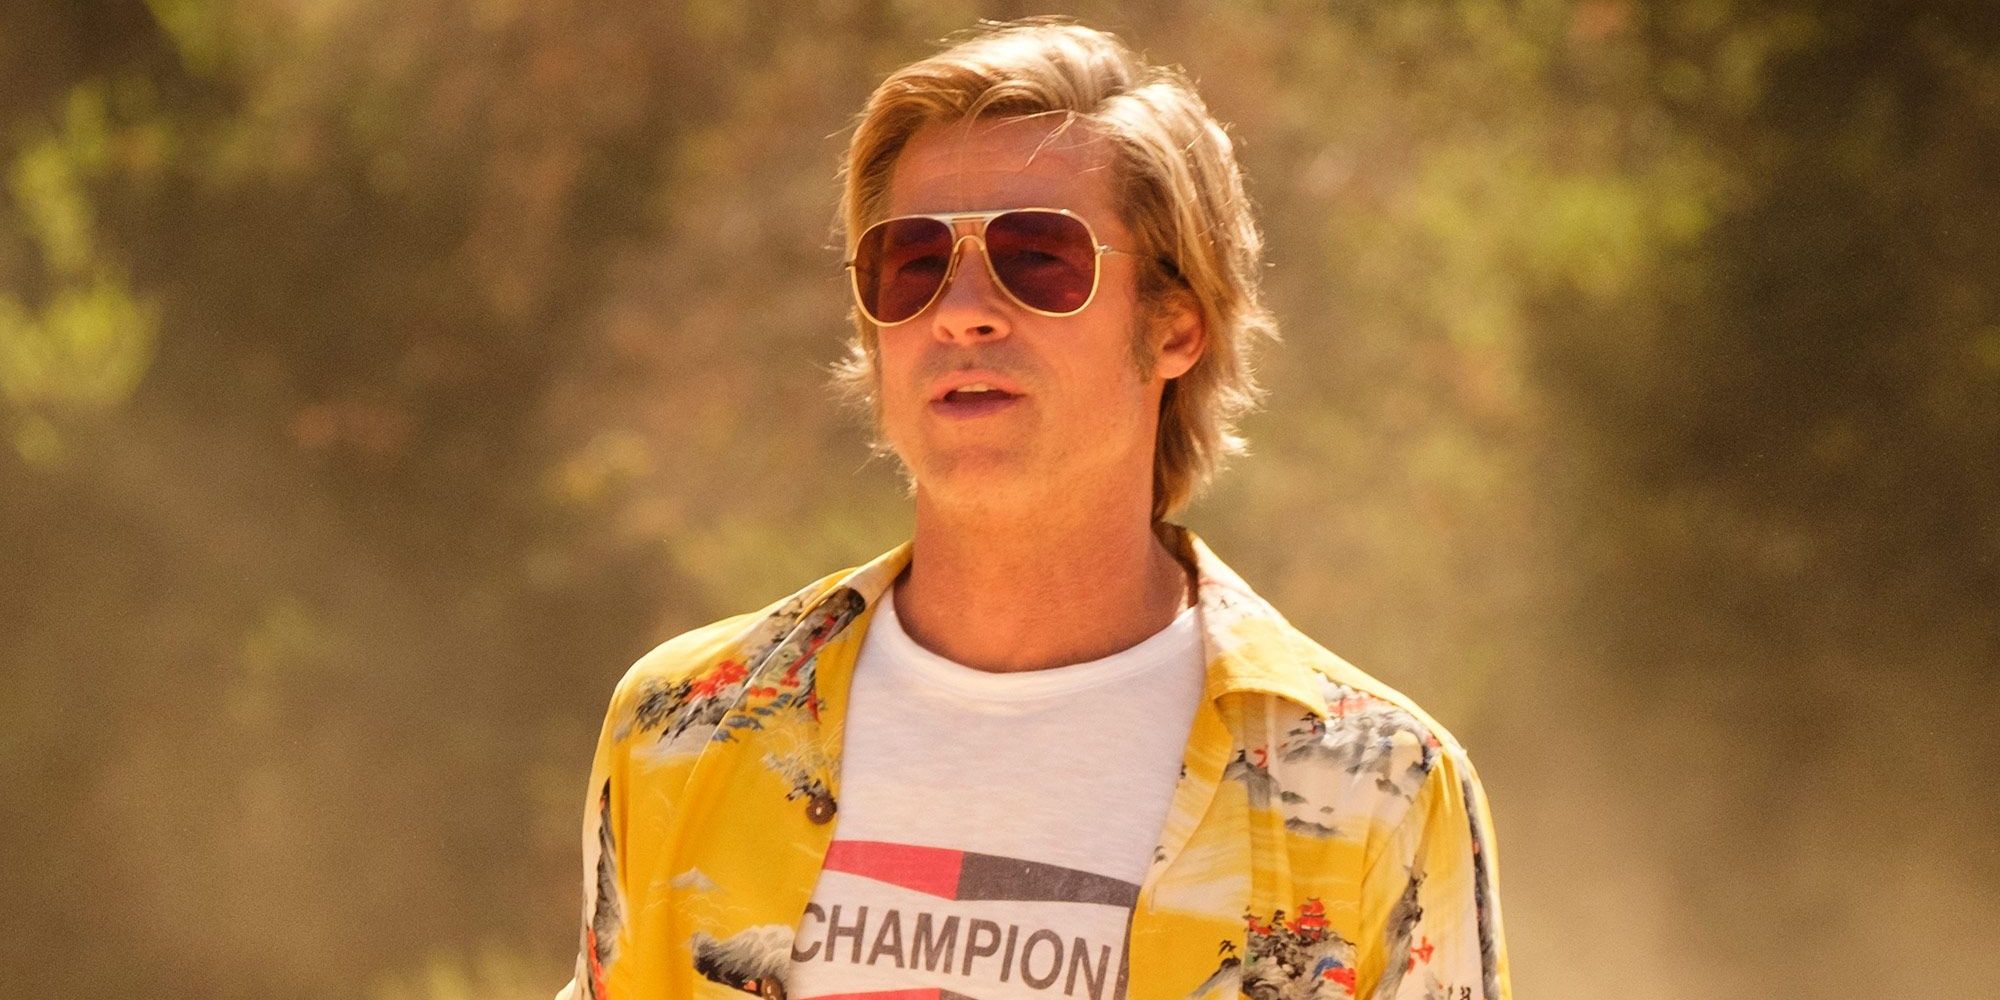 Brad Pitt as Cliff Booth in Once Upon A Time In Hollywood